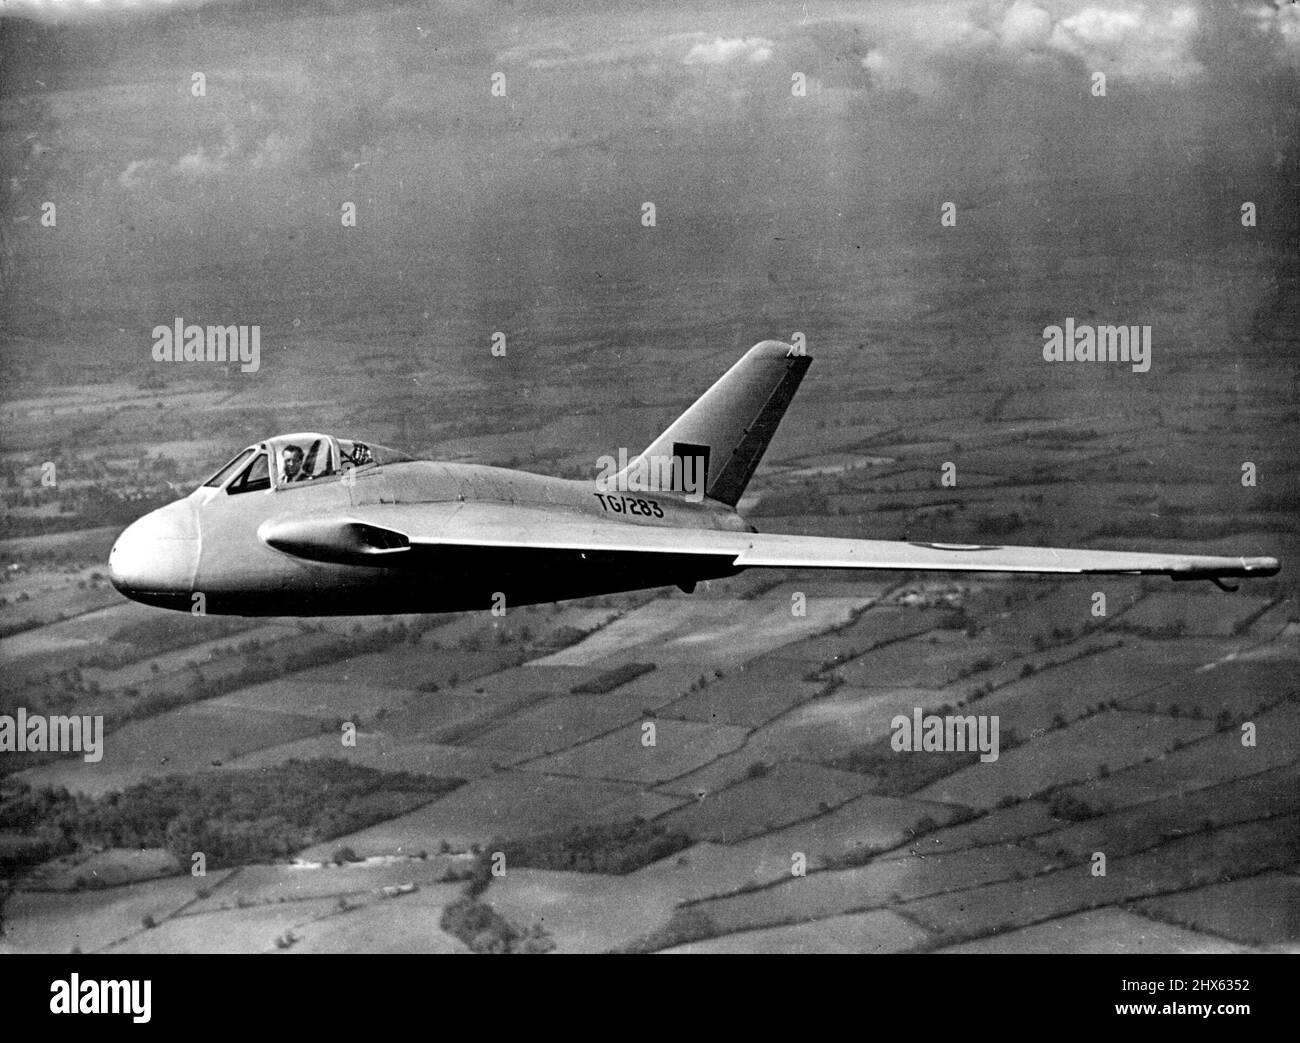 Britain To Go Over To All-Jet Aircraft - Experiments With DH 108. The new DH 108 jet-propelled single-seater research plane in flight over Hatfield airfield: Mr. Geoffrey de Havilland, the designer, is the pilot. Britain, already ahead of other countries in the development of jet propulsion motors, is on the threshold of a new era in civil aviation. All now British planes, both military and civil, are to befitted with pure-jet or gas-turbine engines driving propellers, which represents a big sto Stock Photo